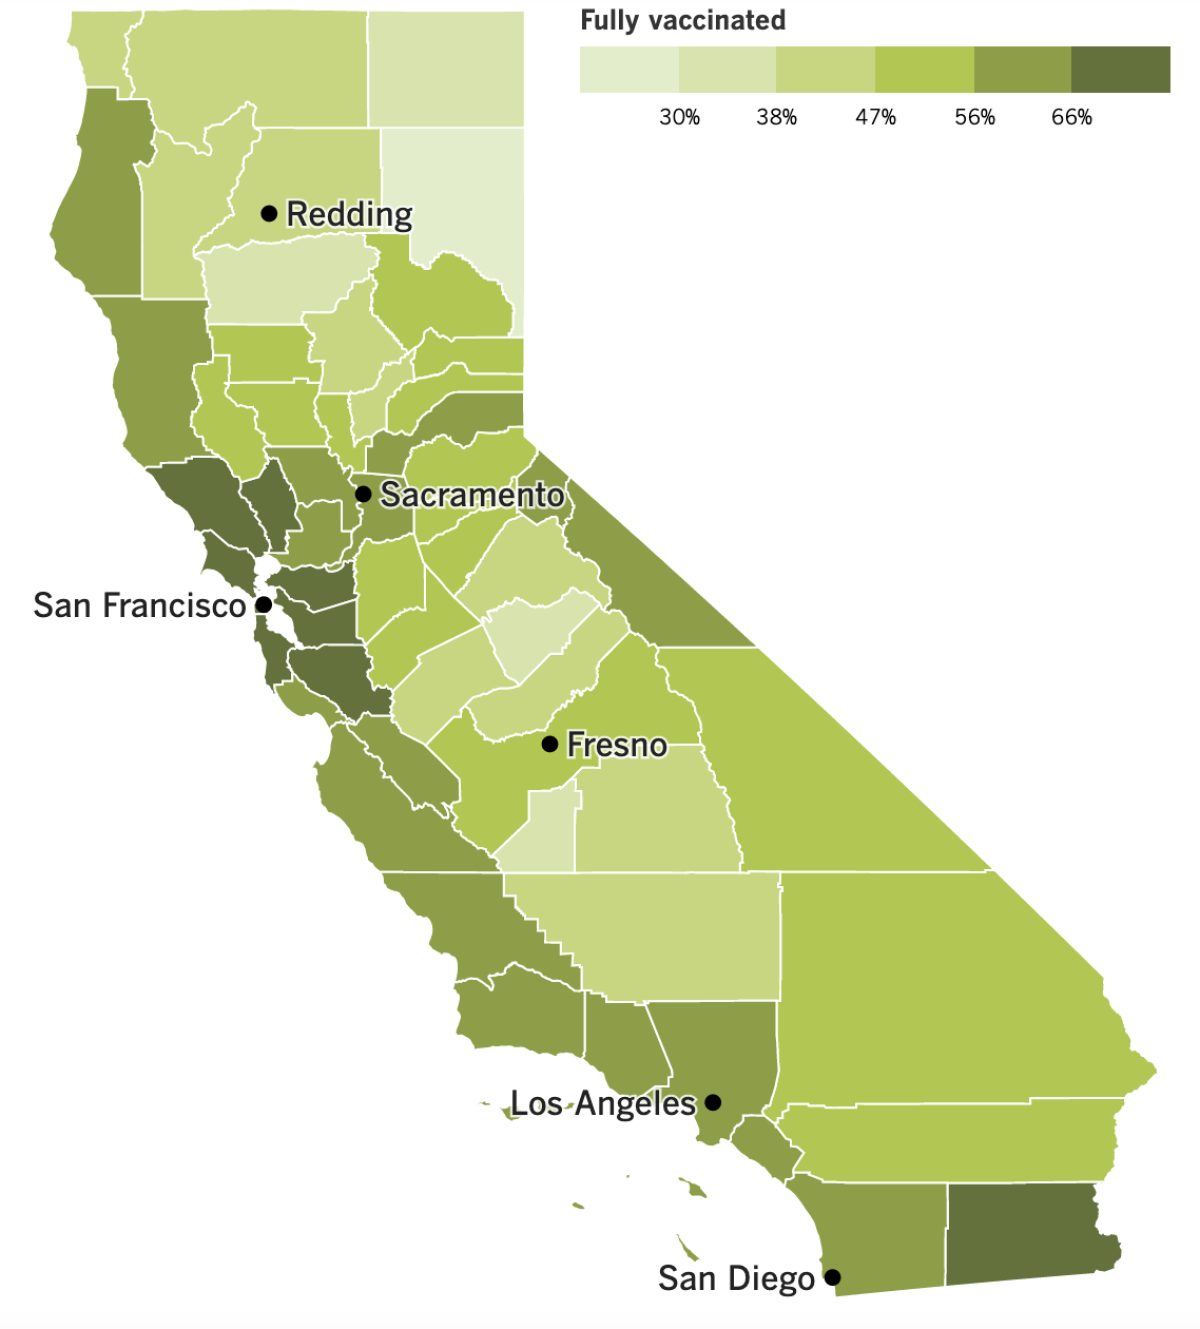 A map showing California's vaccination progress by county.